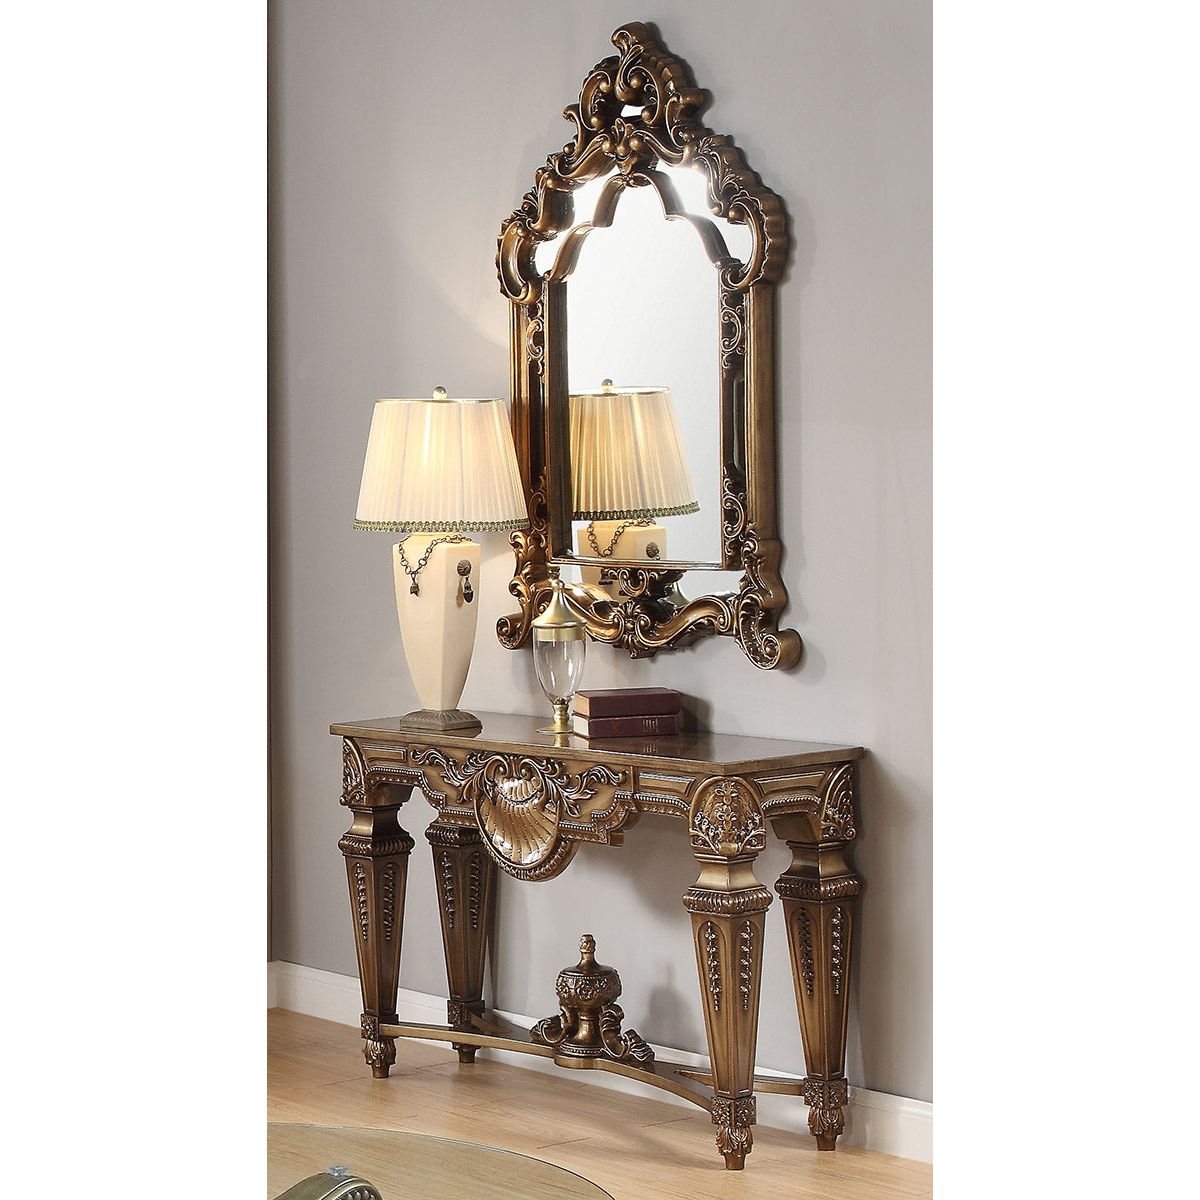 Homey Design HD-8908B - CONSOLE TABLE - New Star Living